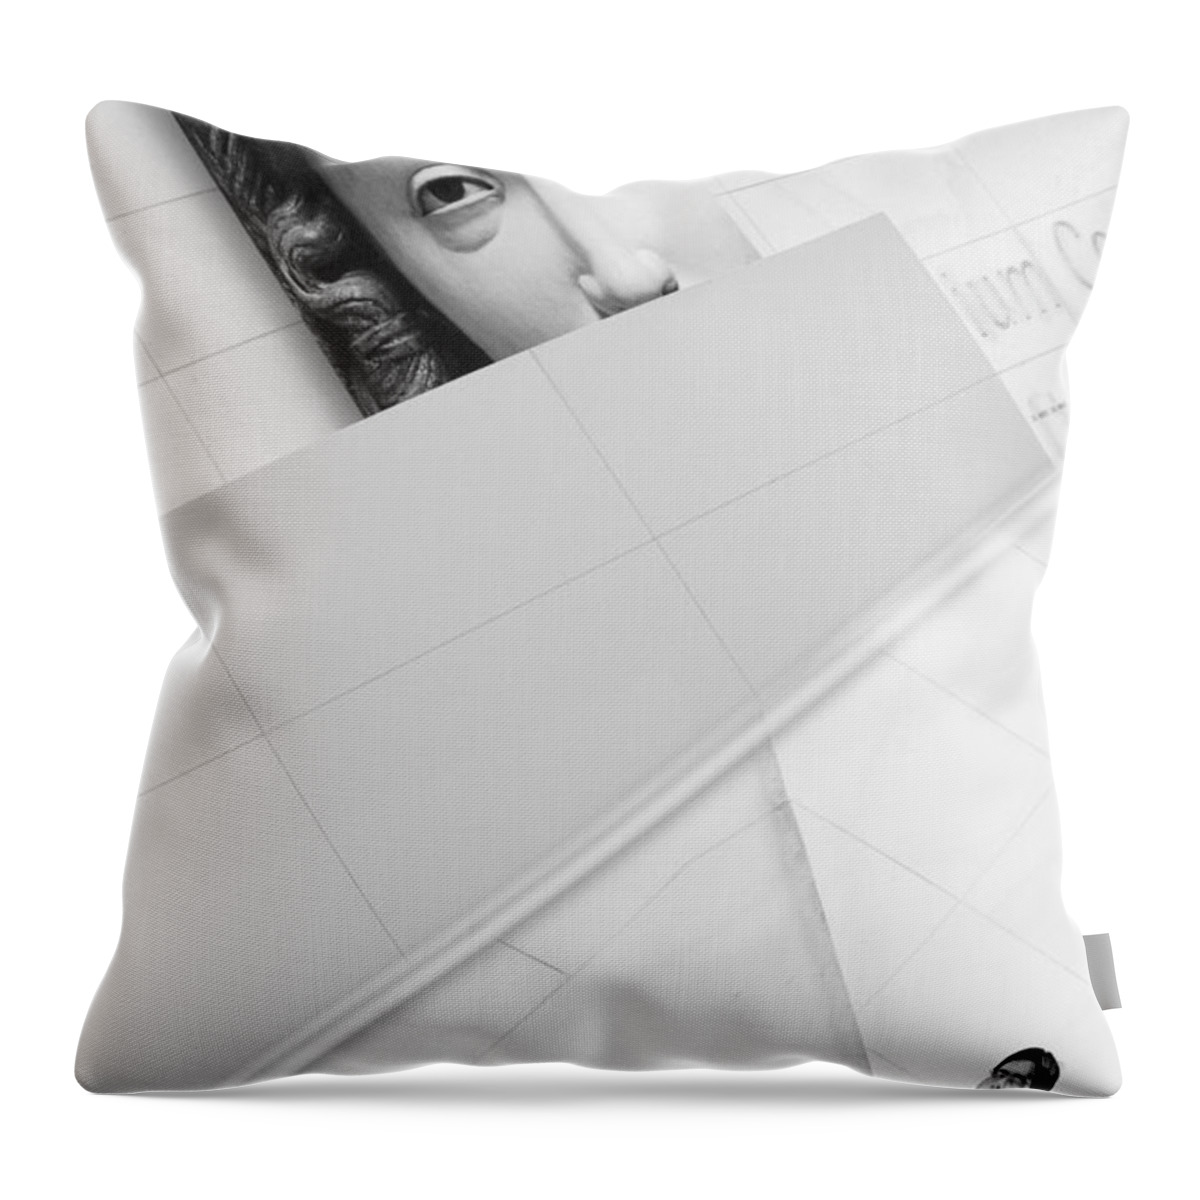 Black And White Throw Pillow featuring the photograph Looking by Richard Piper